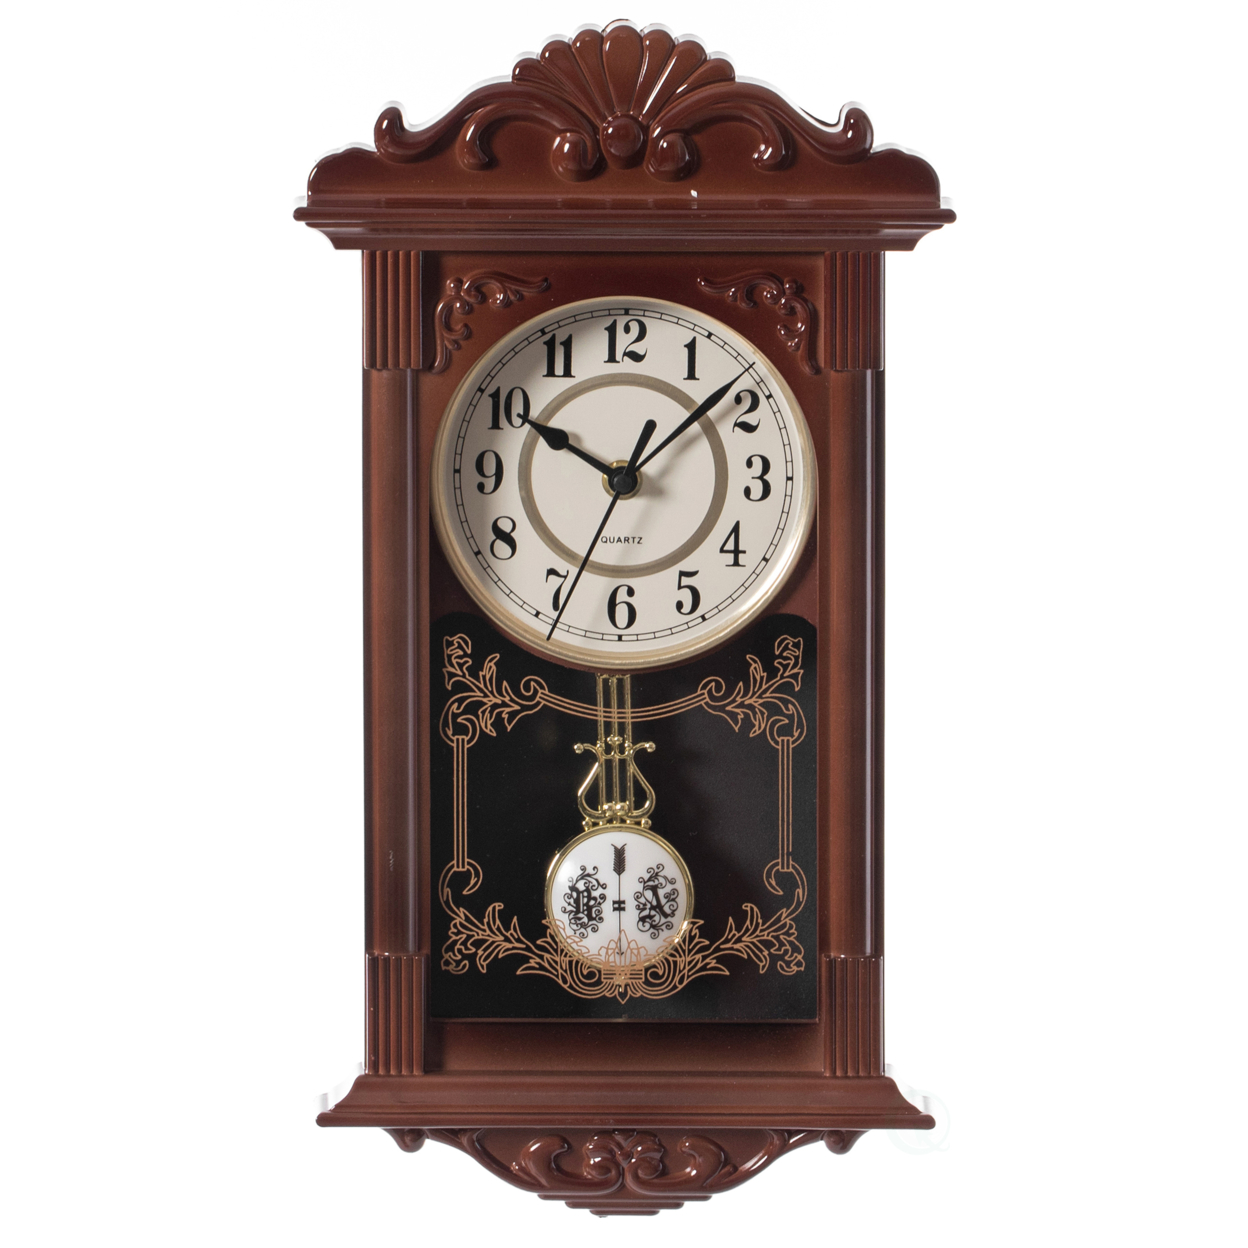 Vintage Grandfather Wood- Looking Plastic Pendulum Wall Clock For Living Room, Kitchen, Or Dining Room - Brown, 16 Inch Heigh